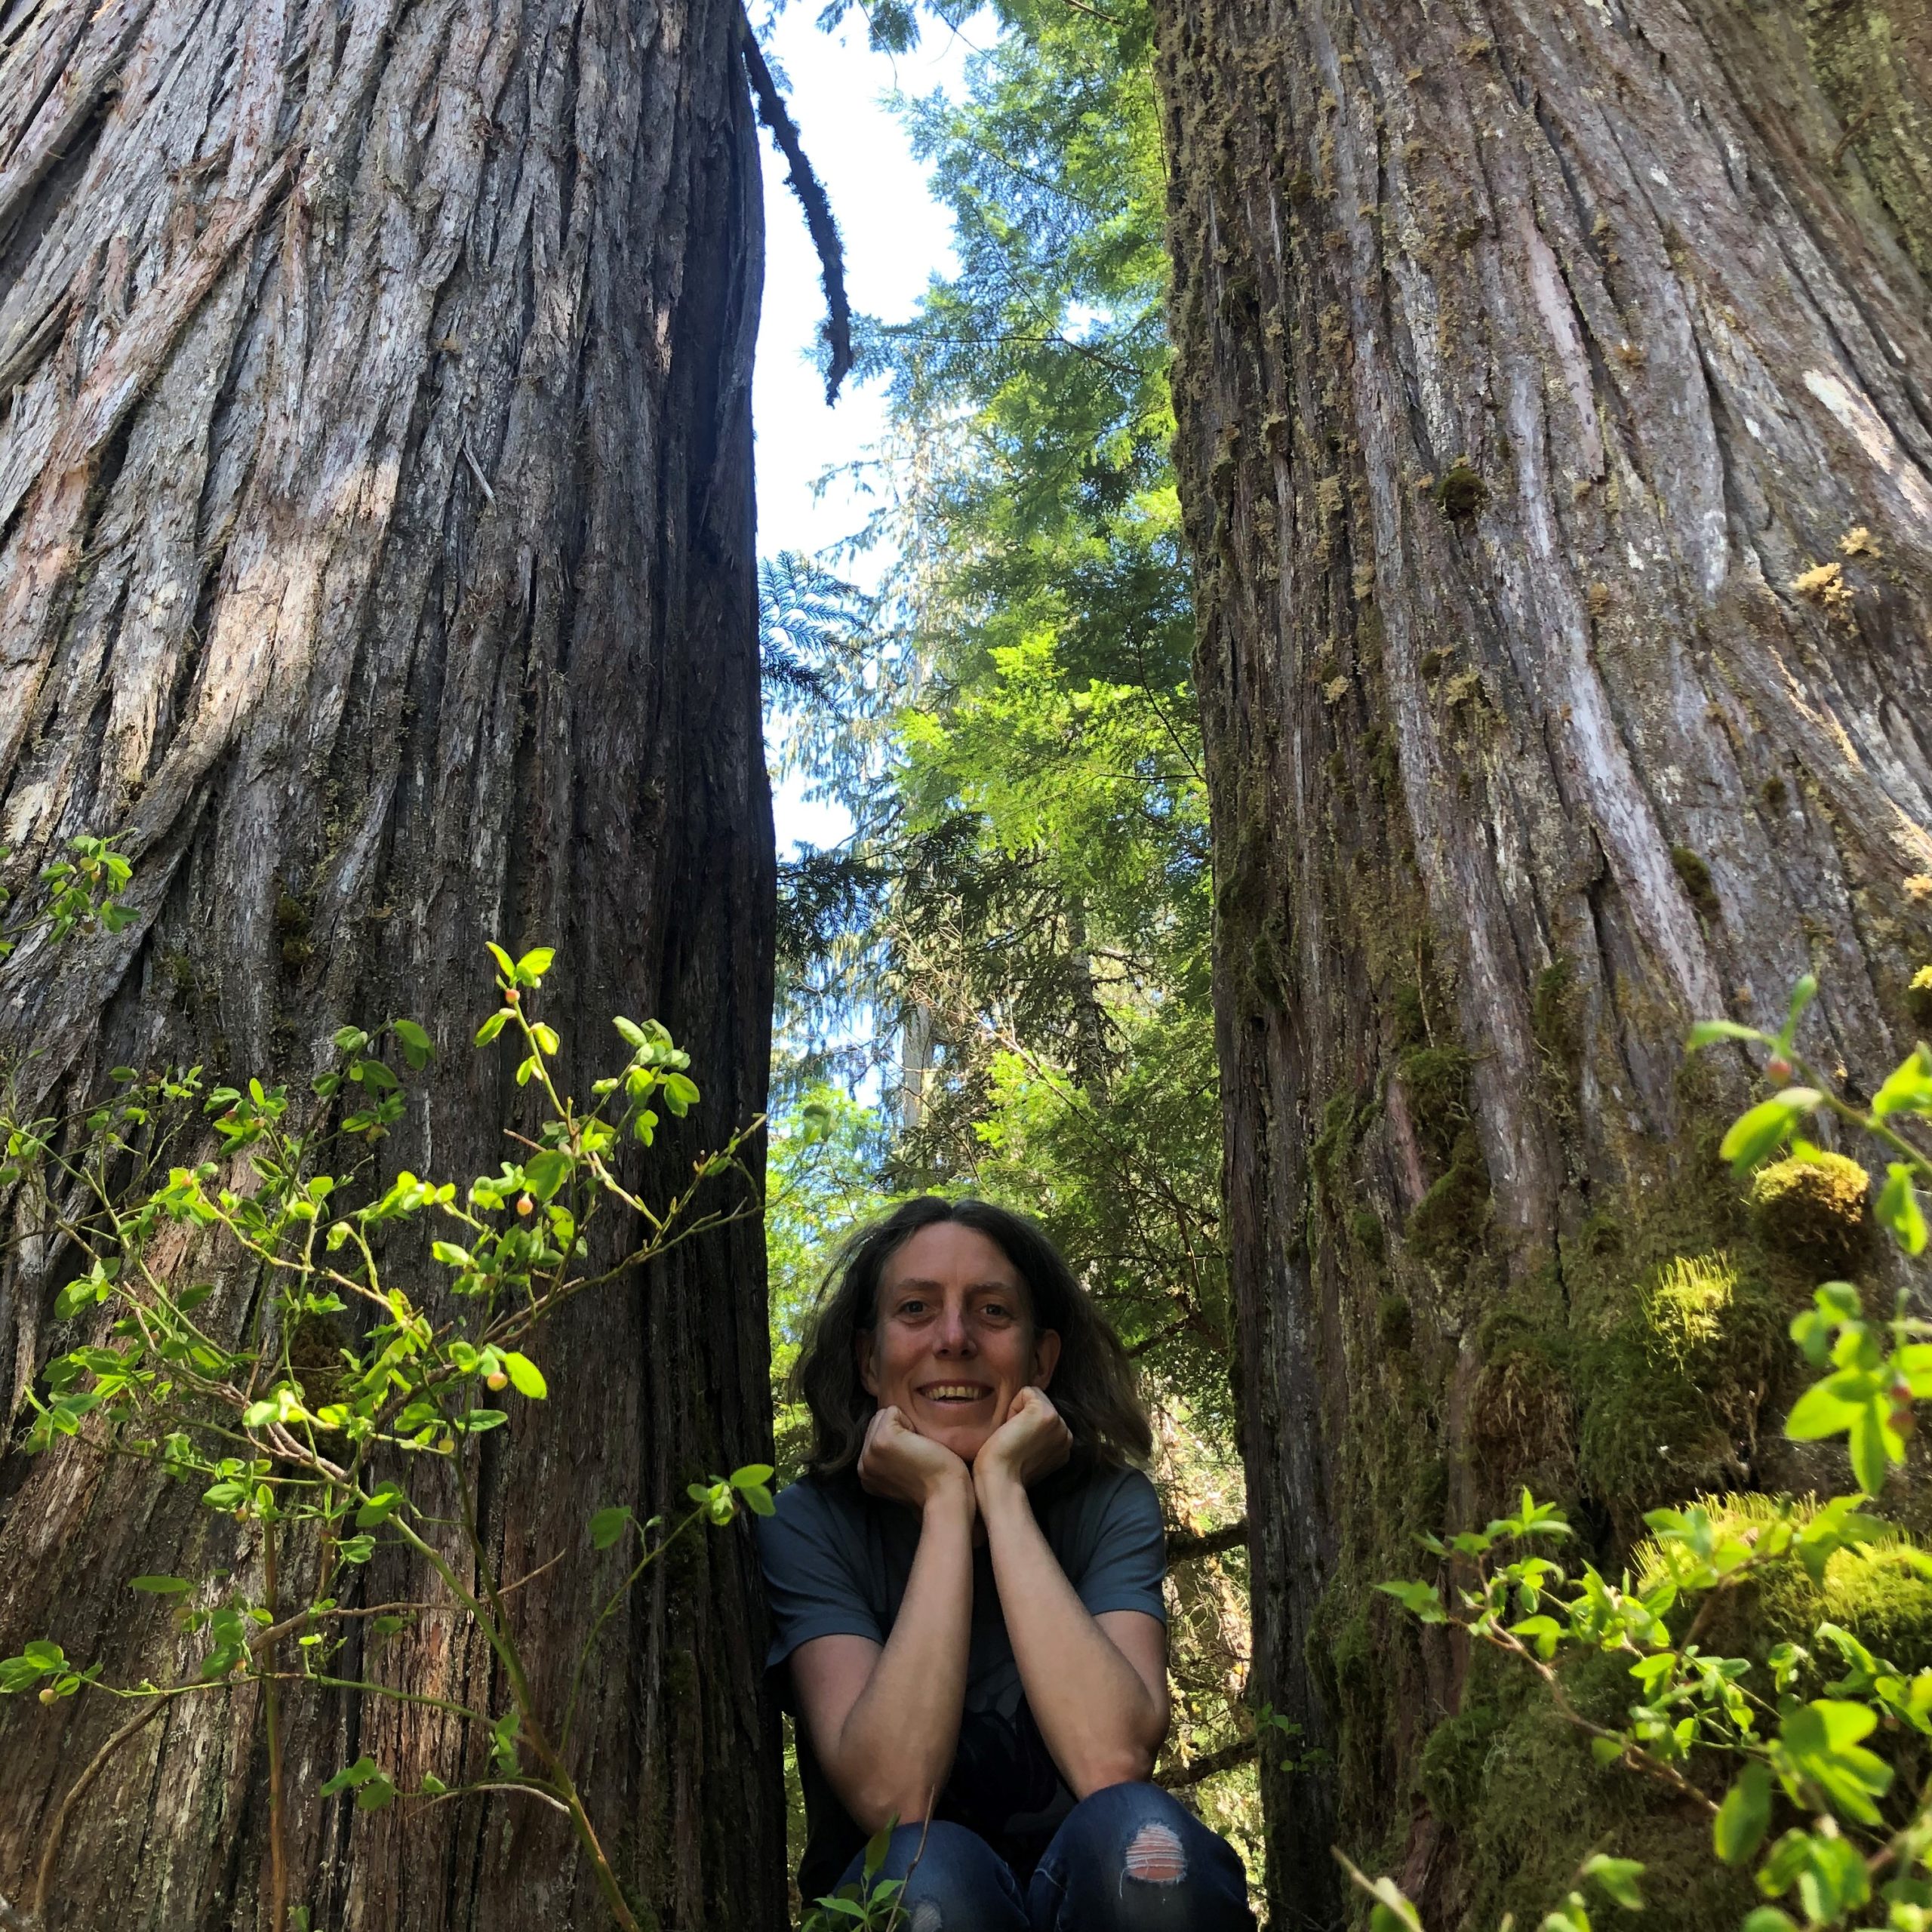 Julie between two tall trees